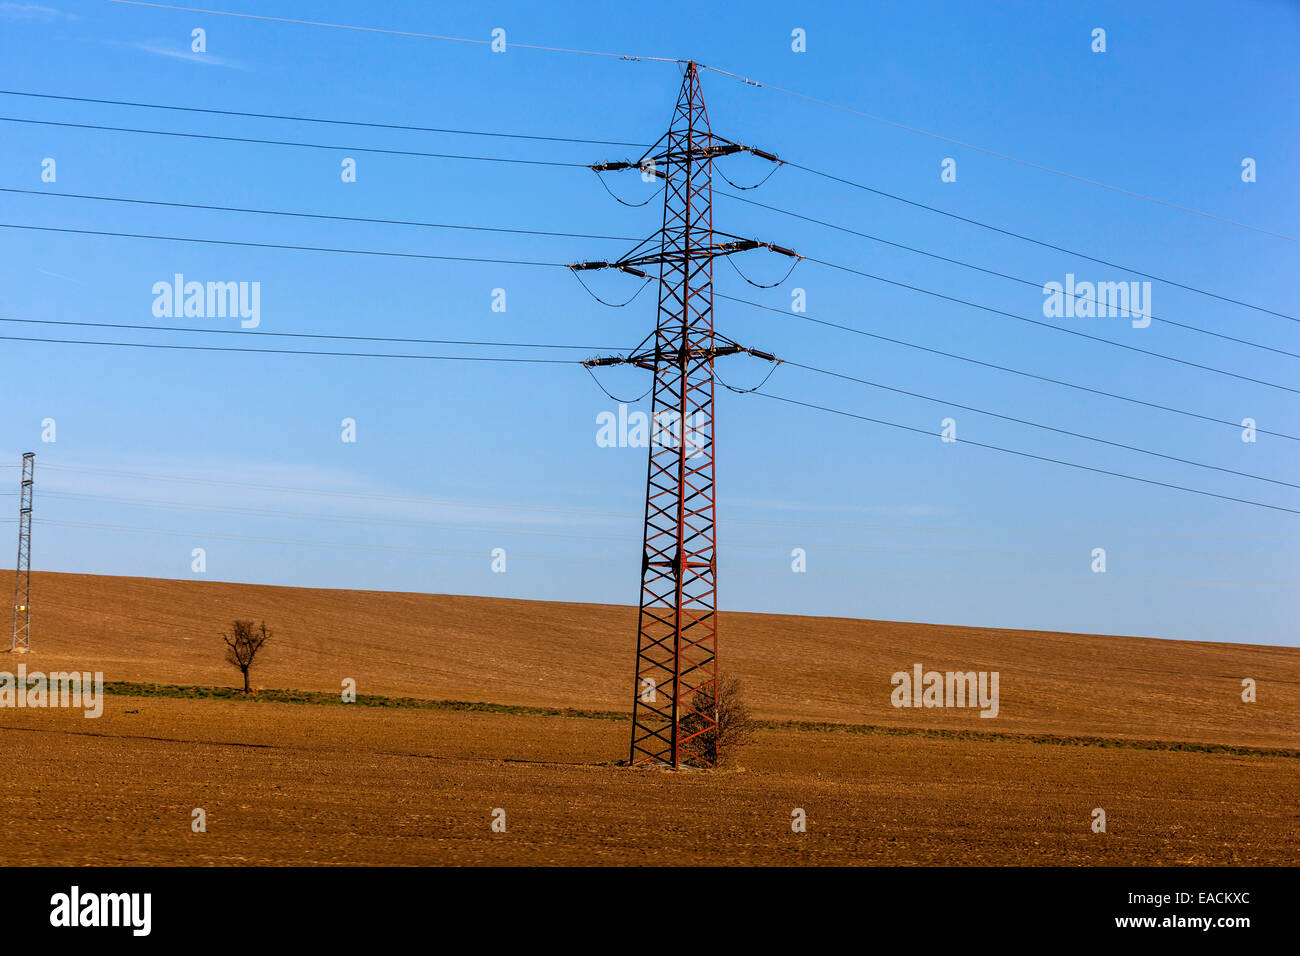 Transmission, power lines in a field Stock Photo